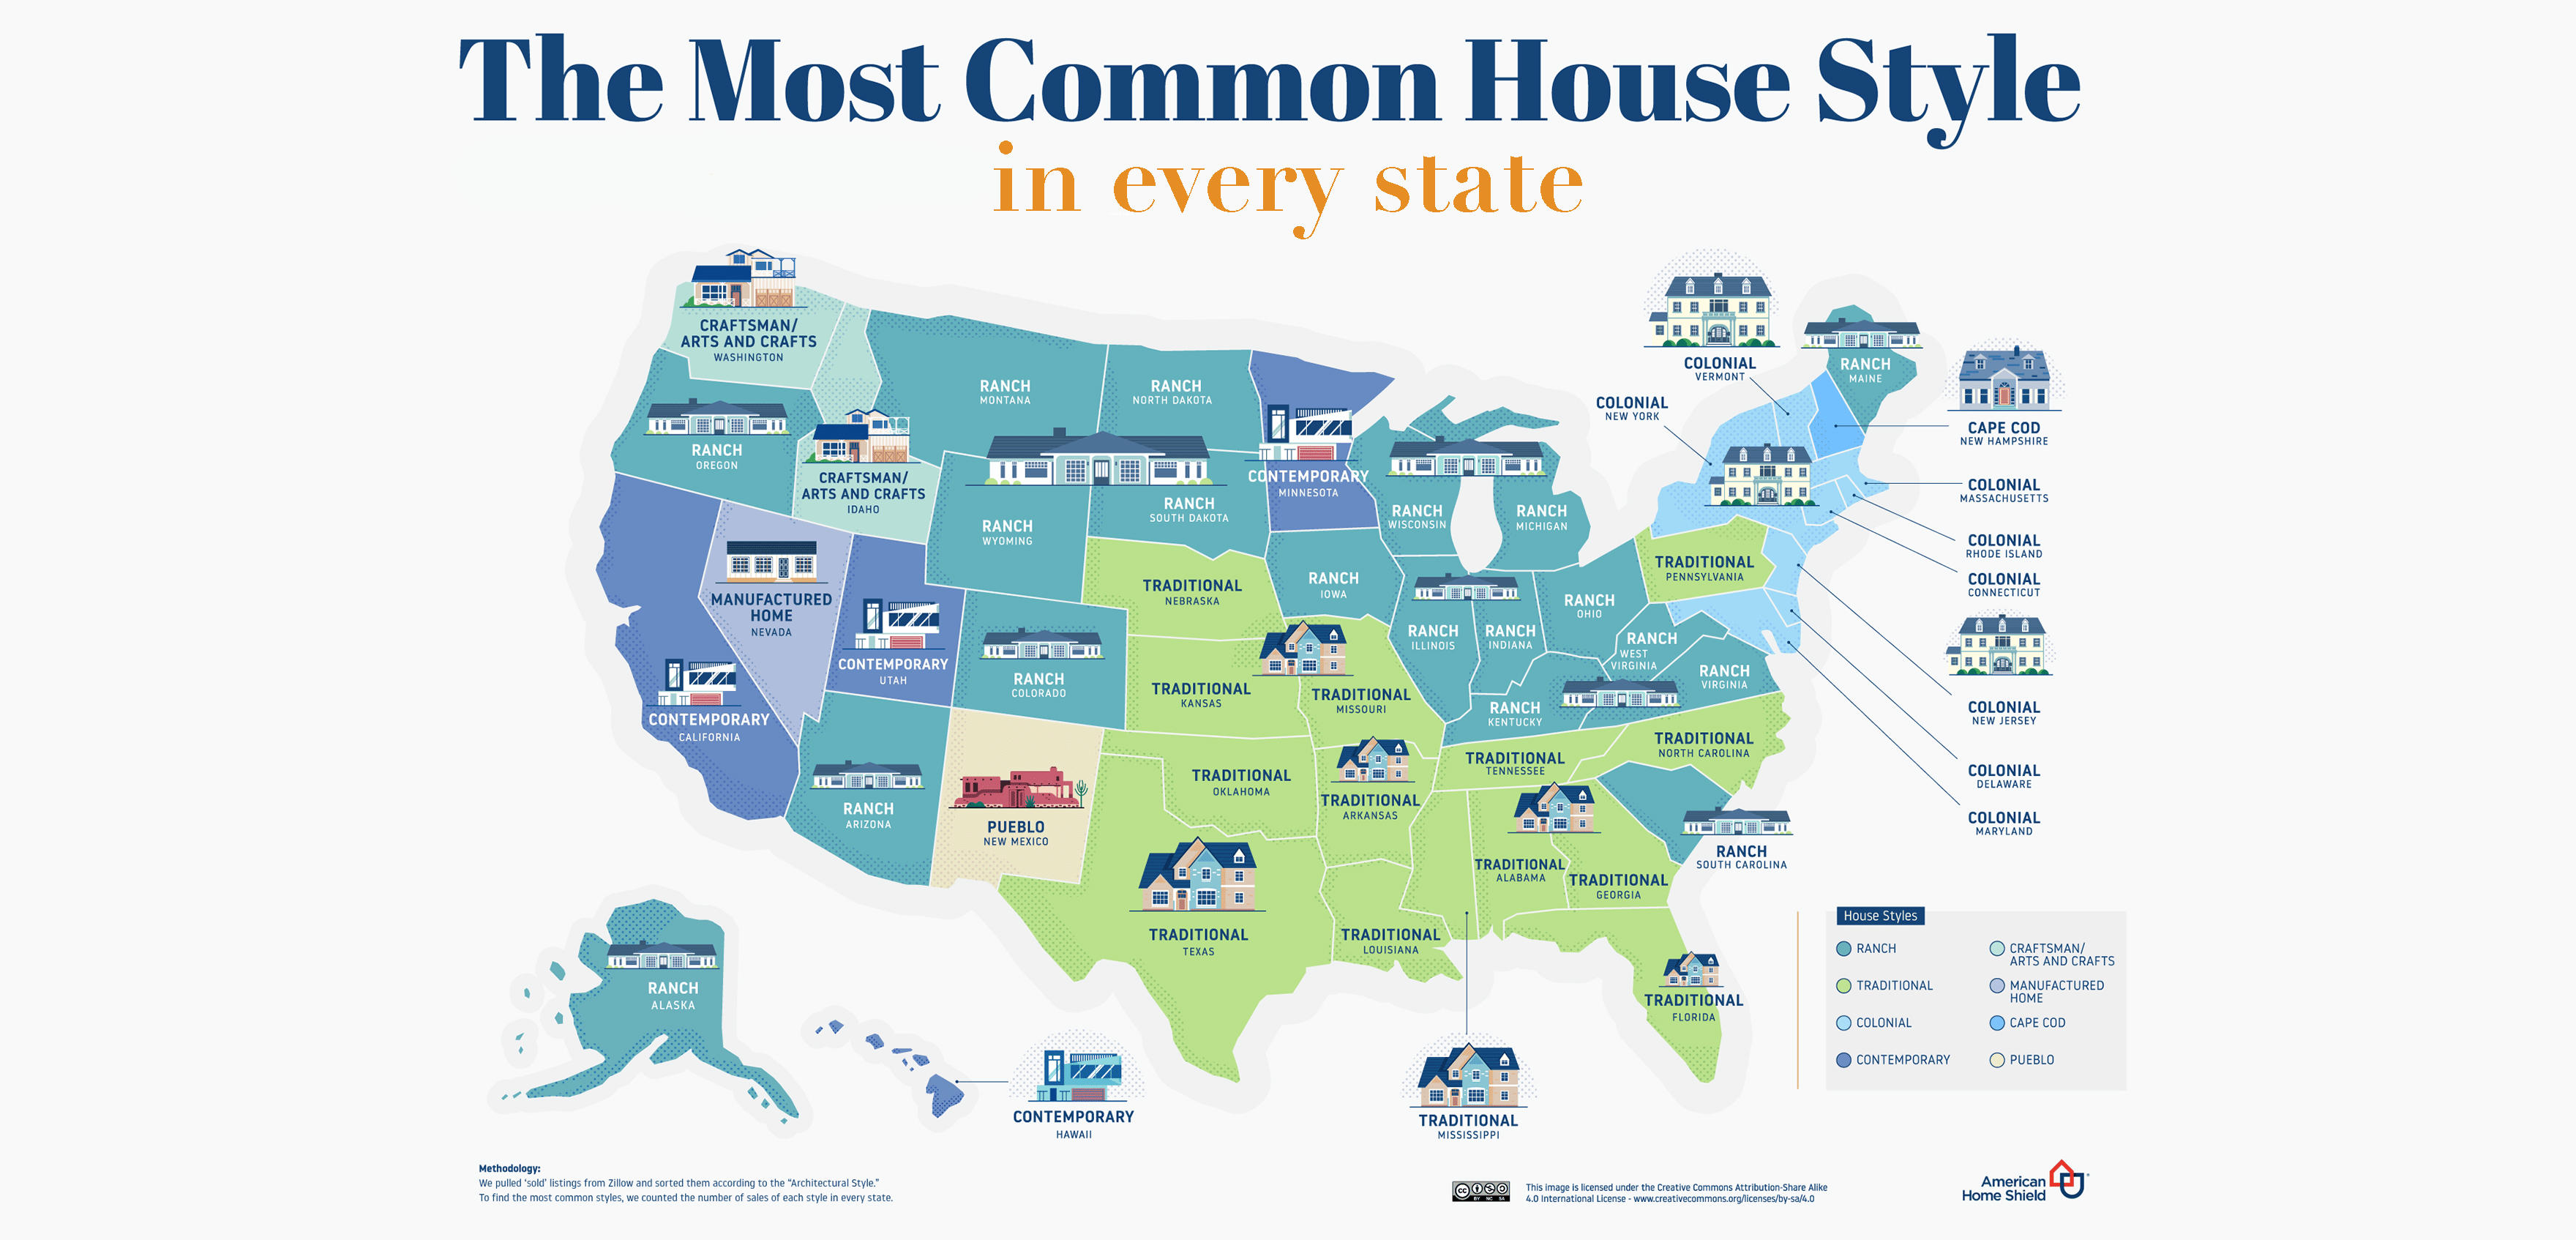 Image of US map showing popular home styles